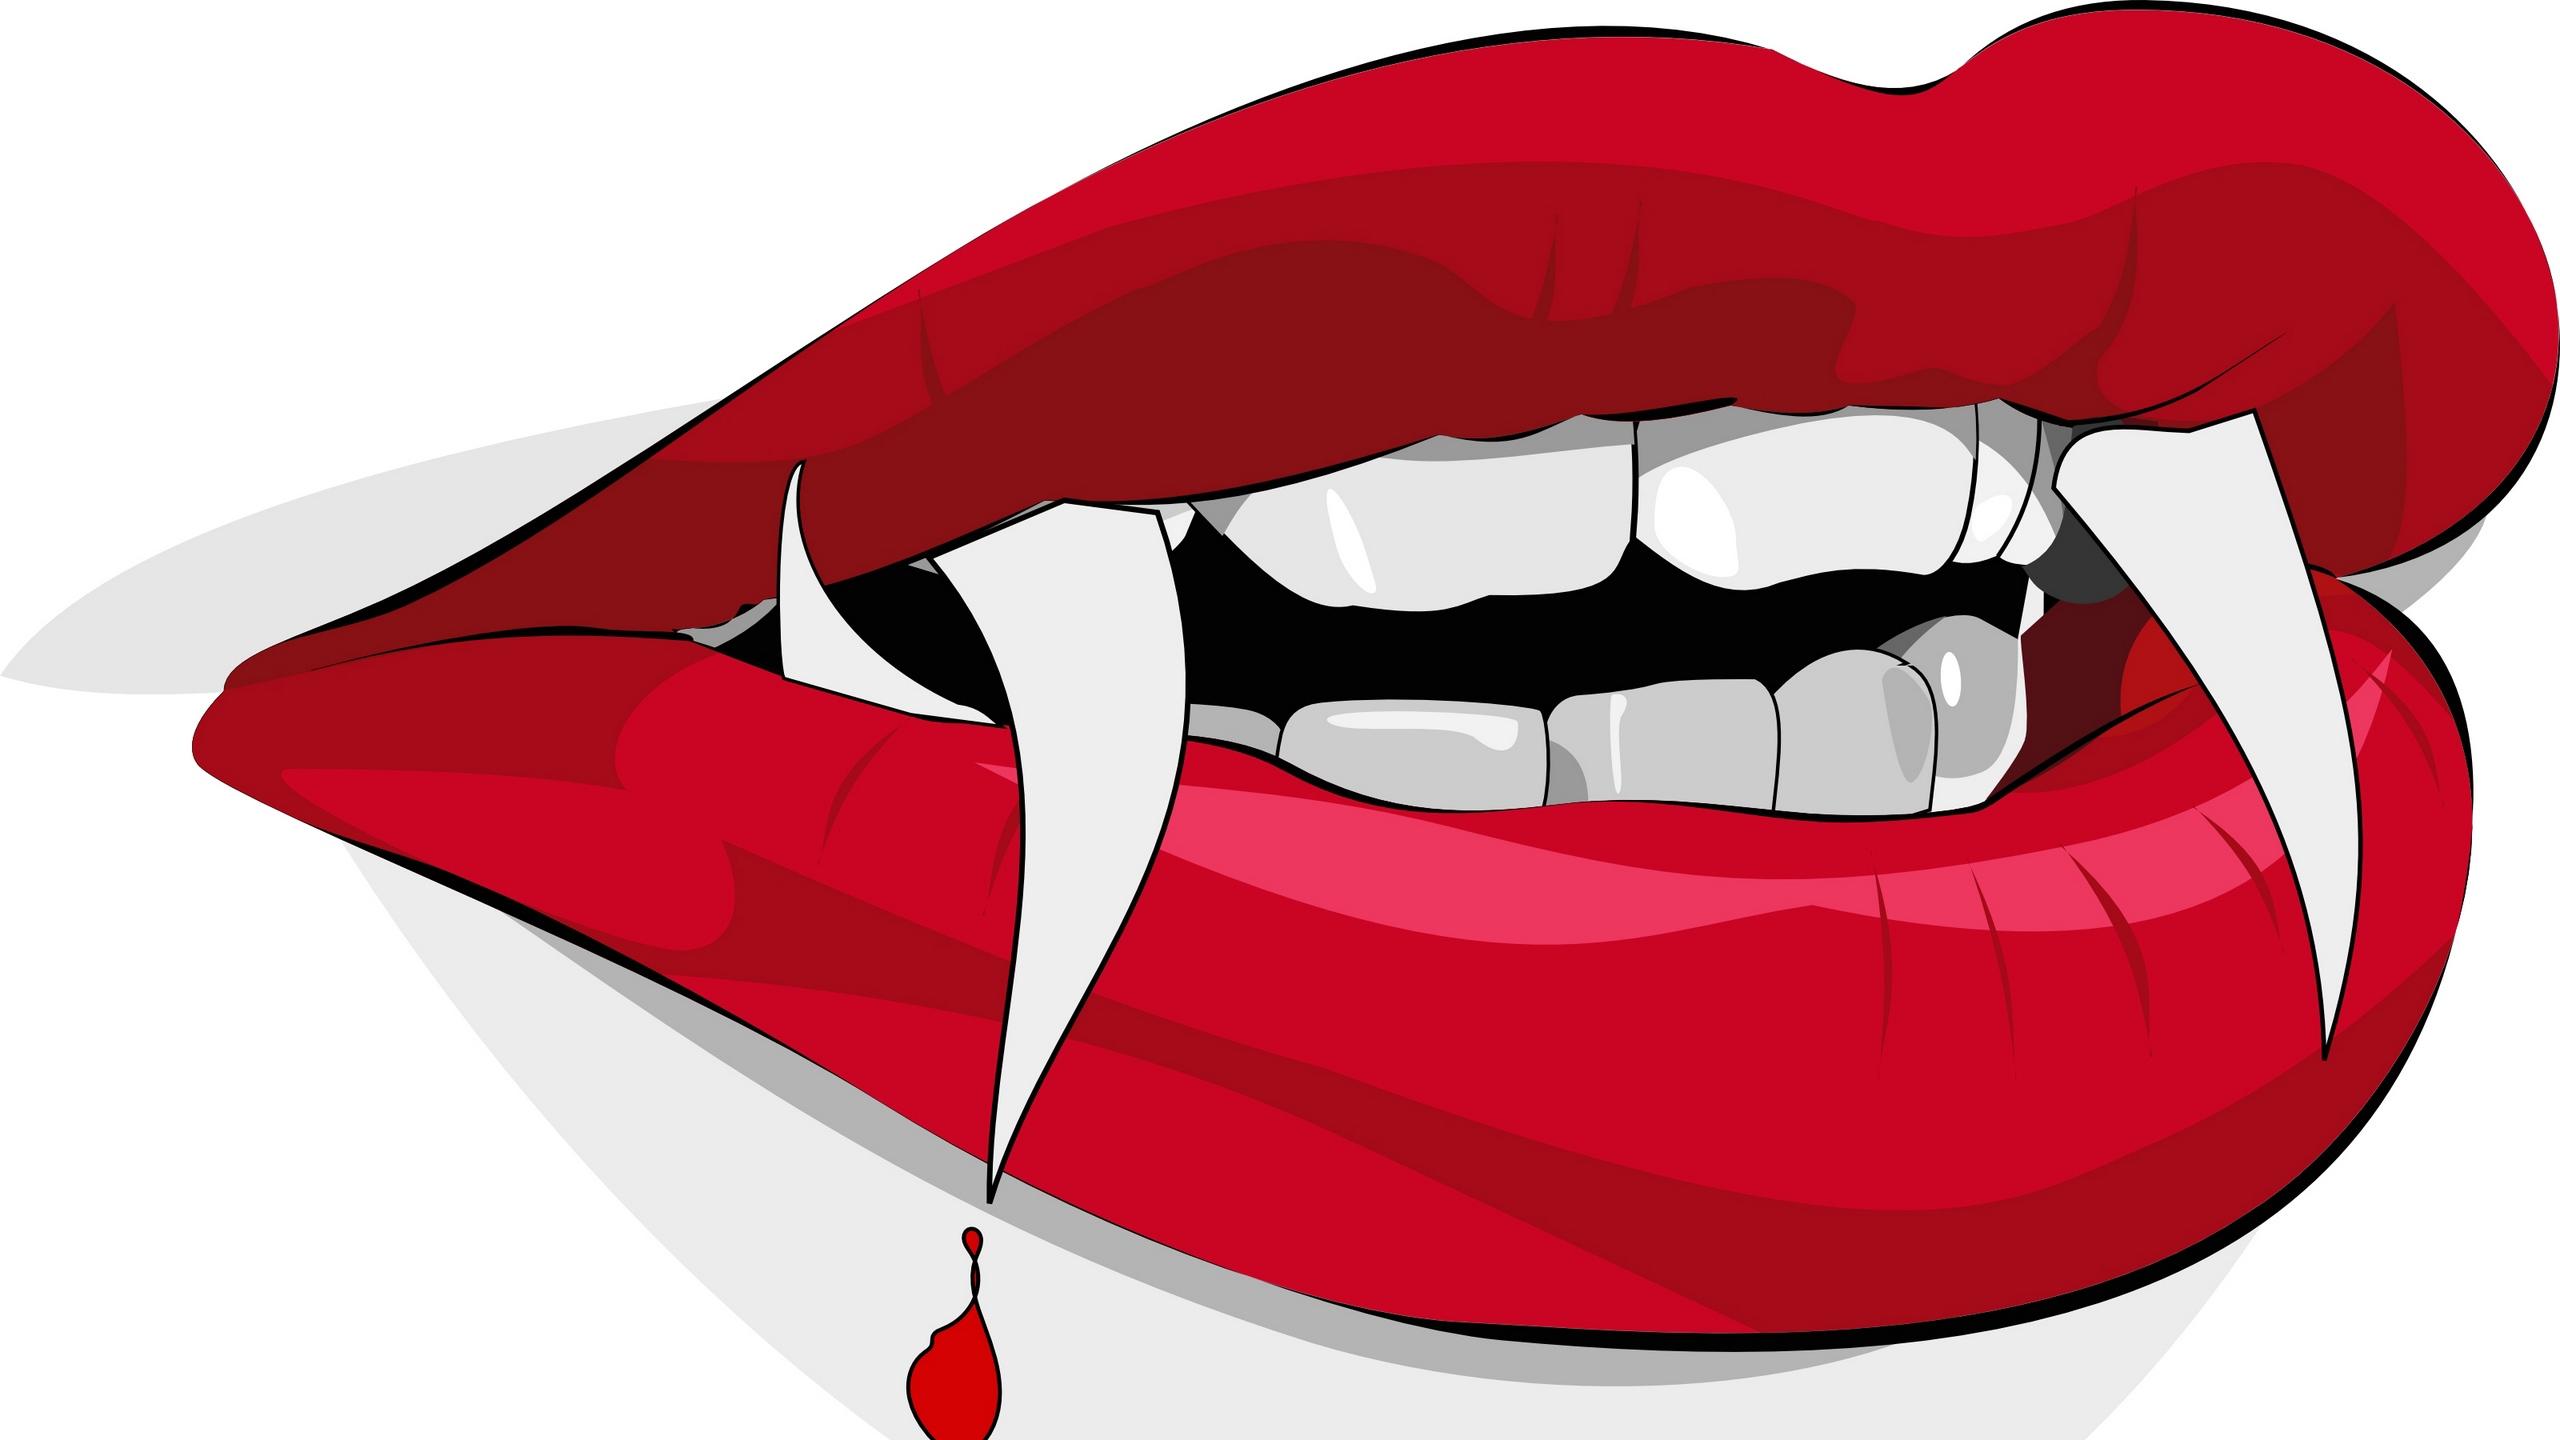 Download wallpaper 2560x1440 mouth, jaw, teeth, vampire, blood